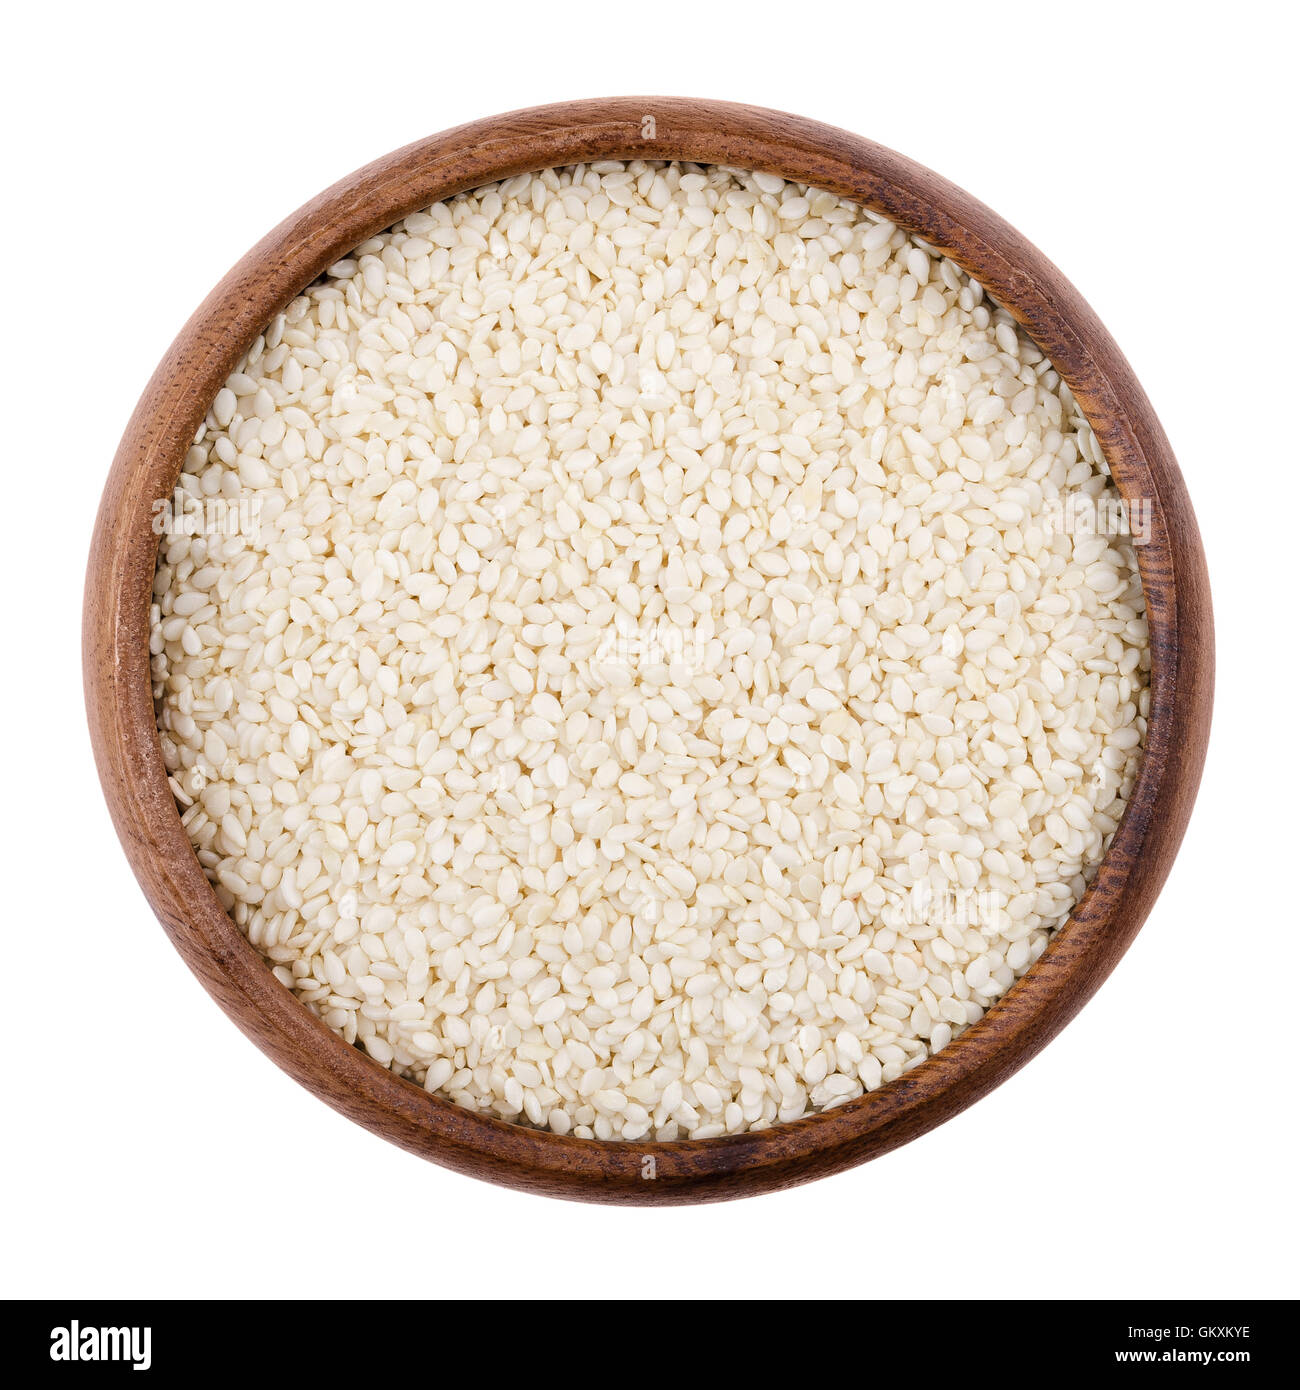 Sesame seeds in a wooden bowl on white background. Dried seeds with removed seed coats. Sesamum, also called benne. Stock Photo